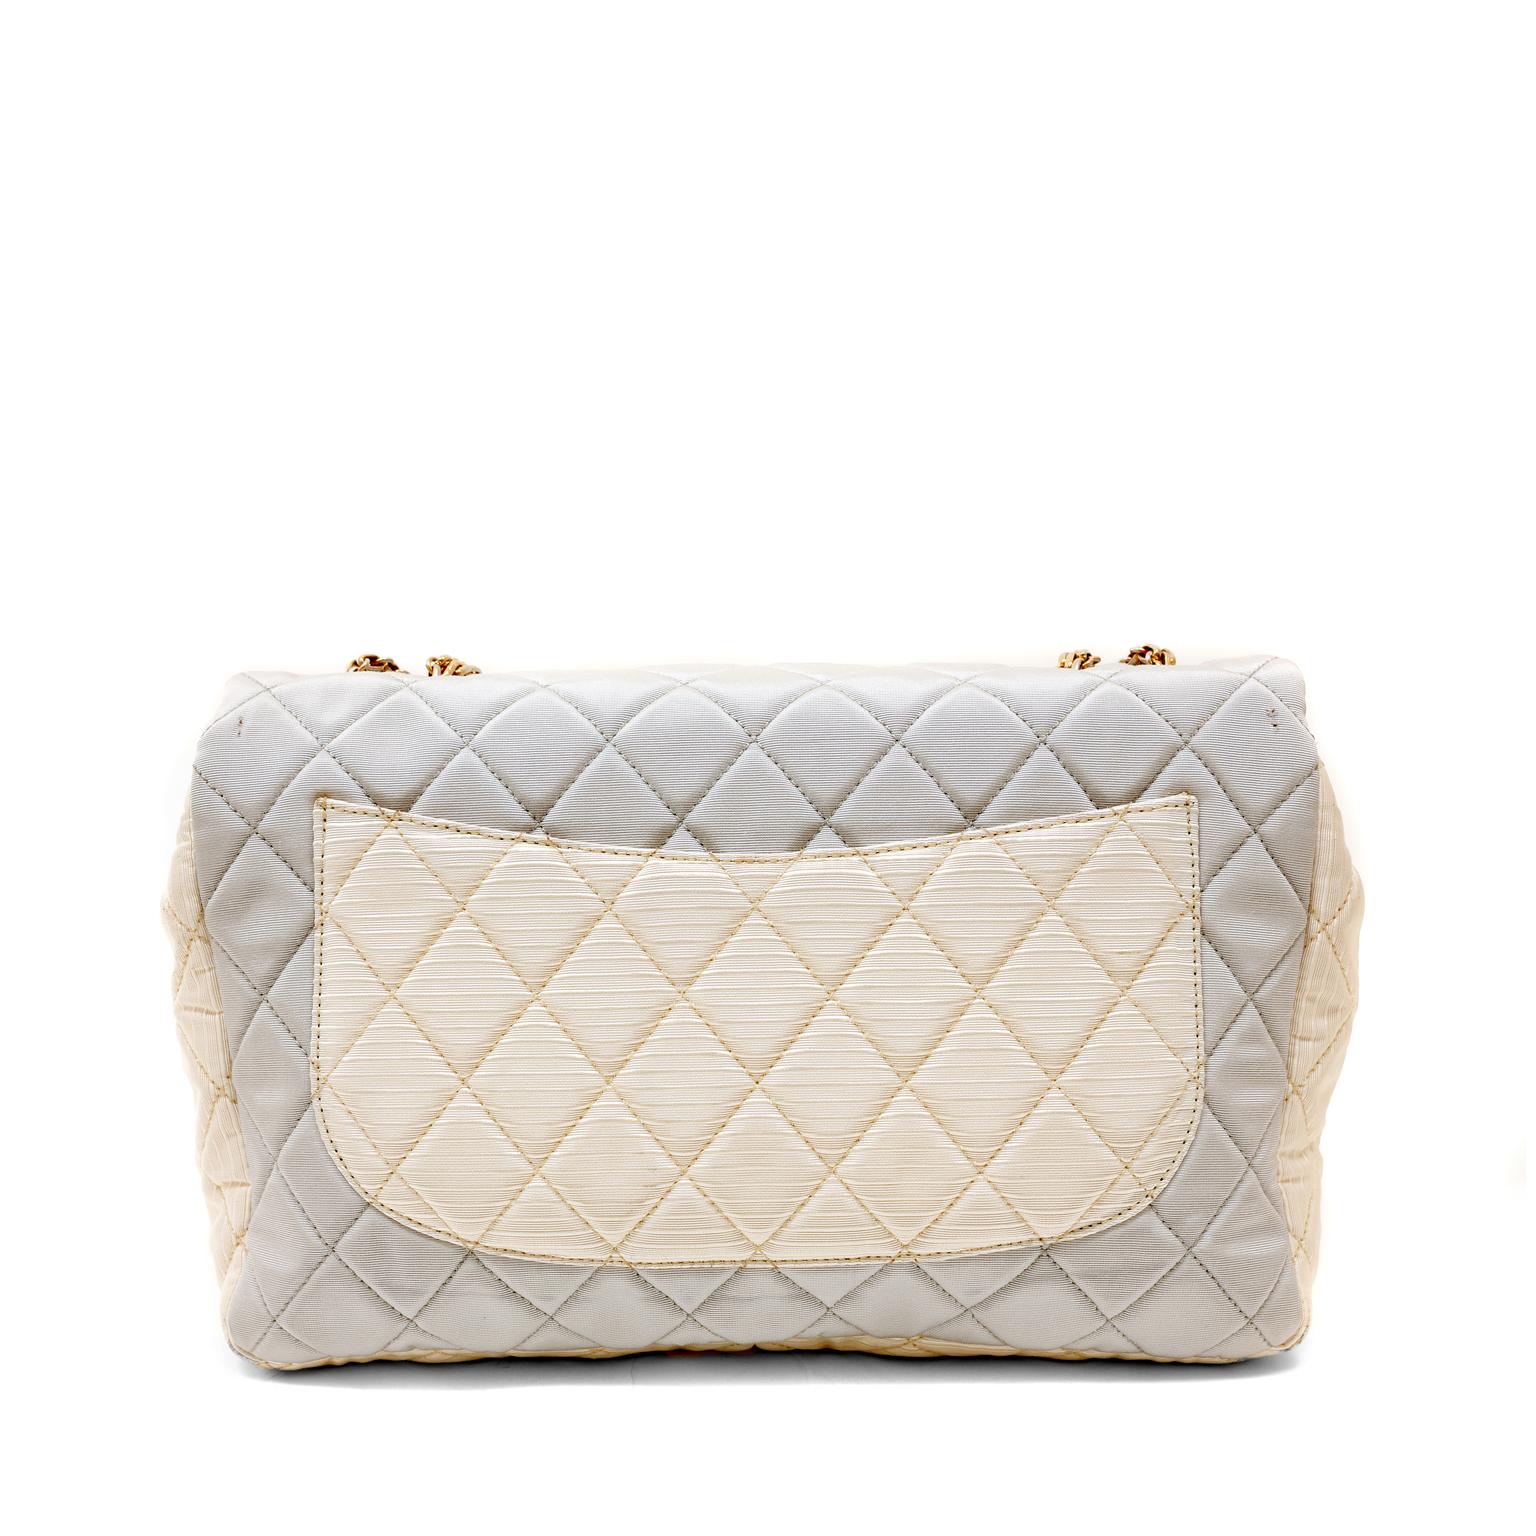 This authentic Chanel Tricolor Fabric Reissue Flap Bag is in excellent condition.  It is a beautiful version of the iconic reissue in feminine pastel colors.
Grosgrain fabric is quilted in signature Chanel diamond pattern in shades of pale powder